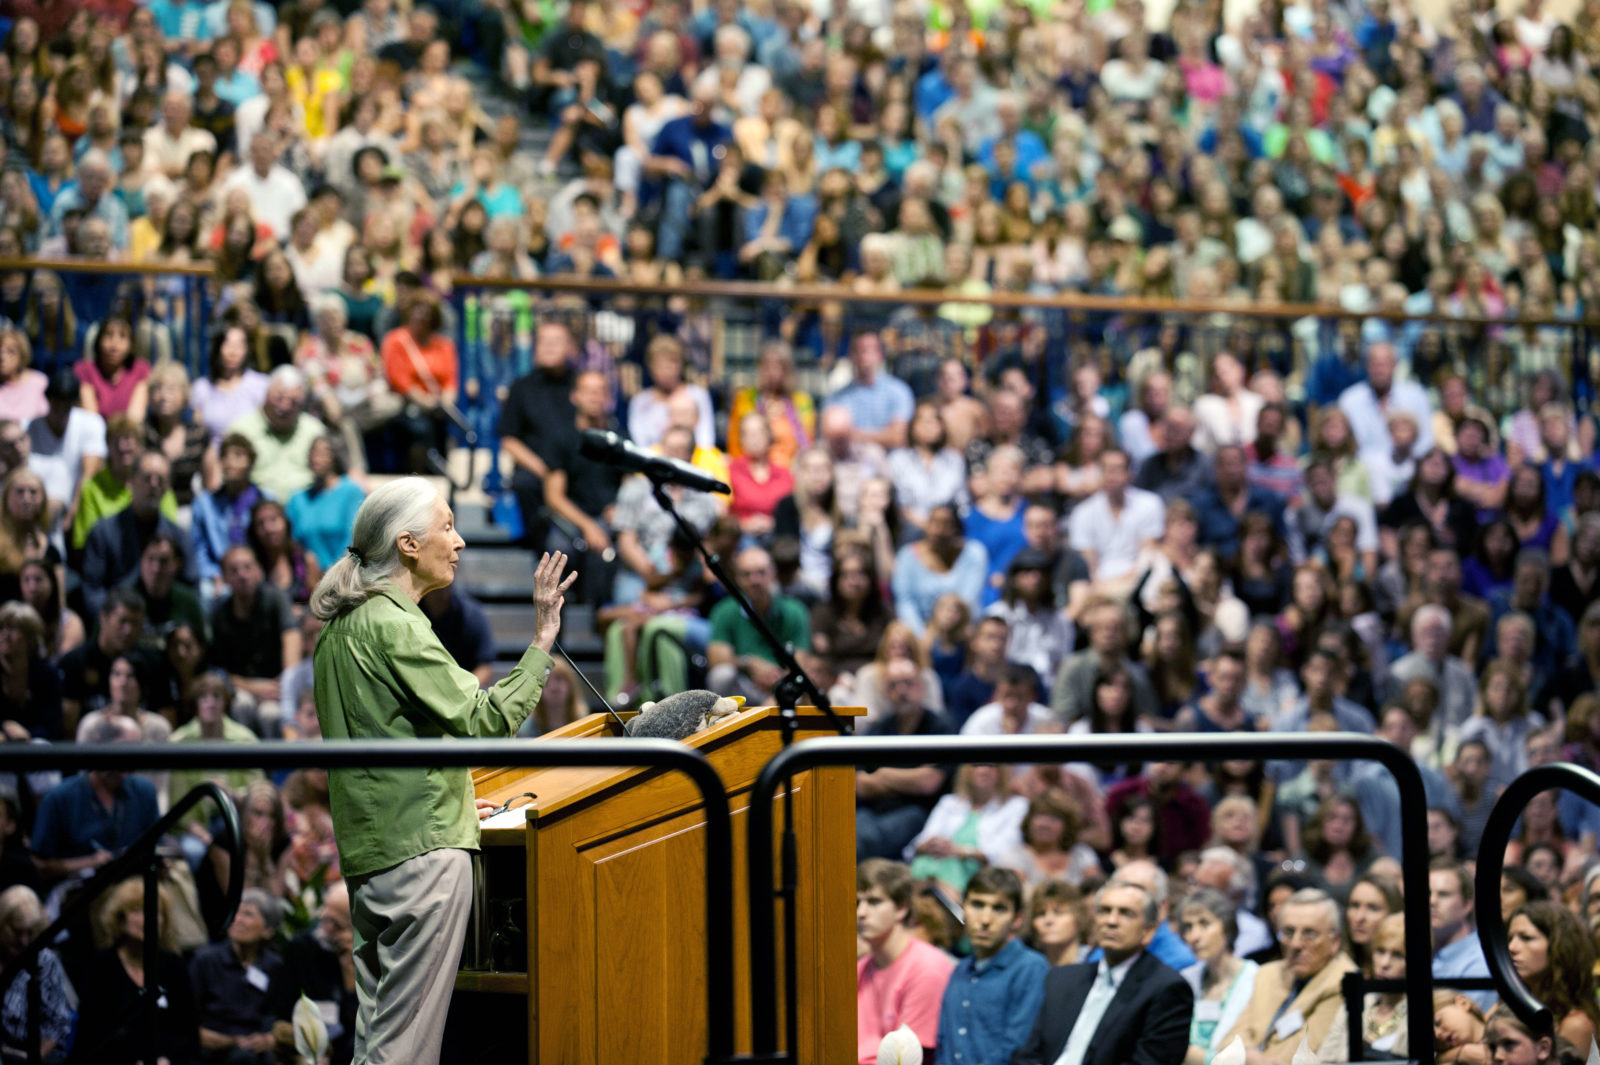 Jane Goodall stands at a podium and delivers a speech to a crowded stadium.